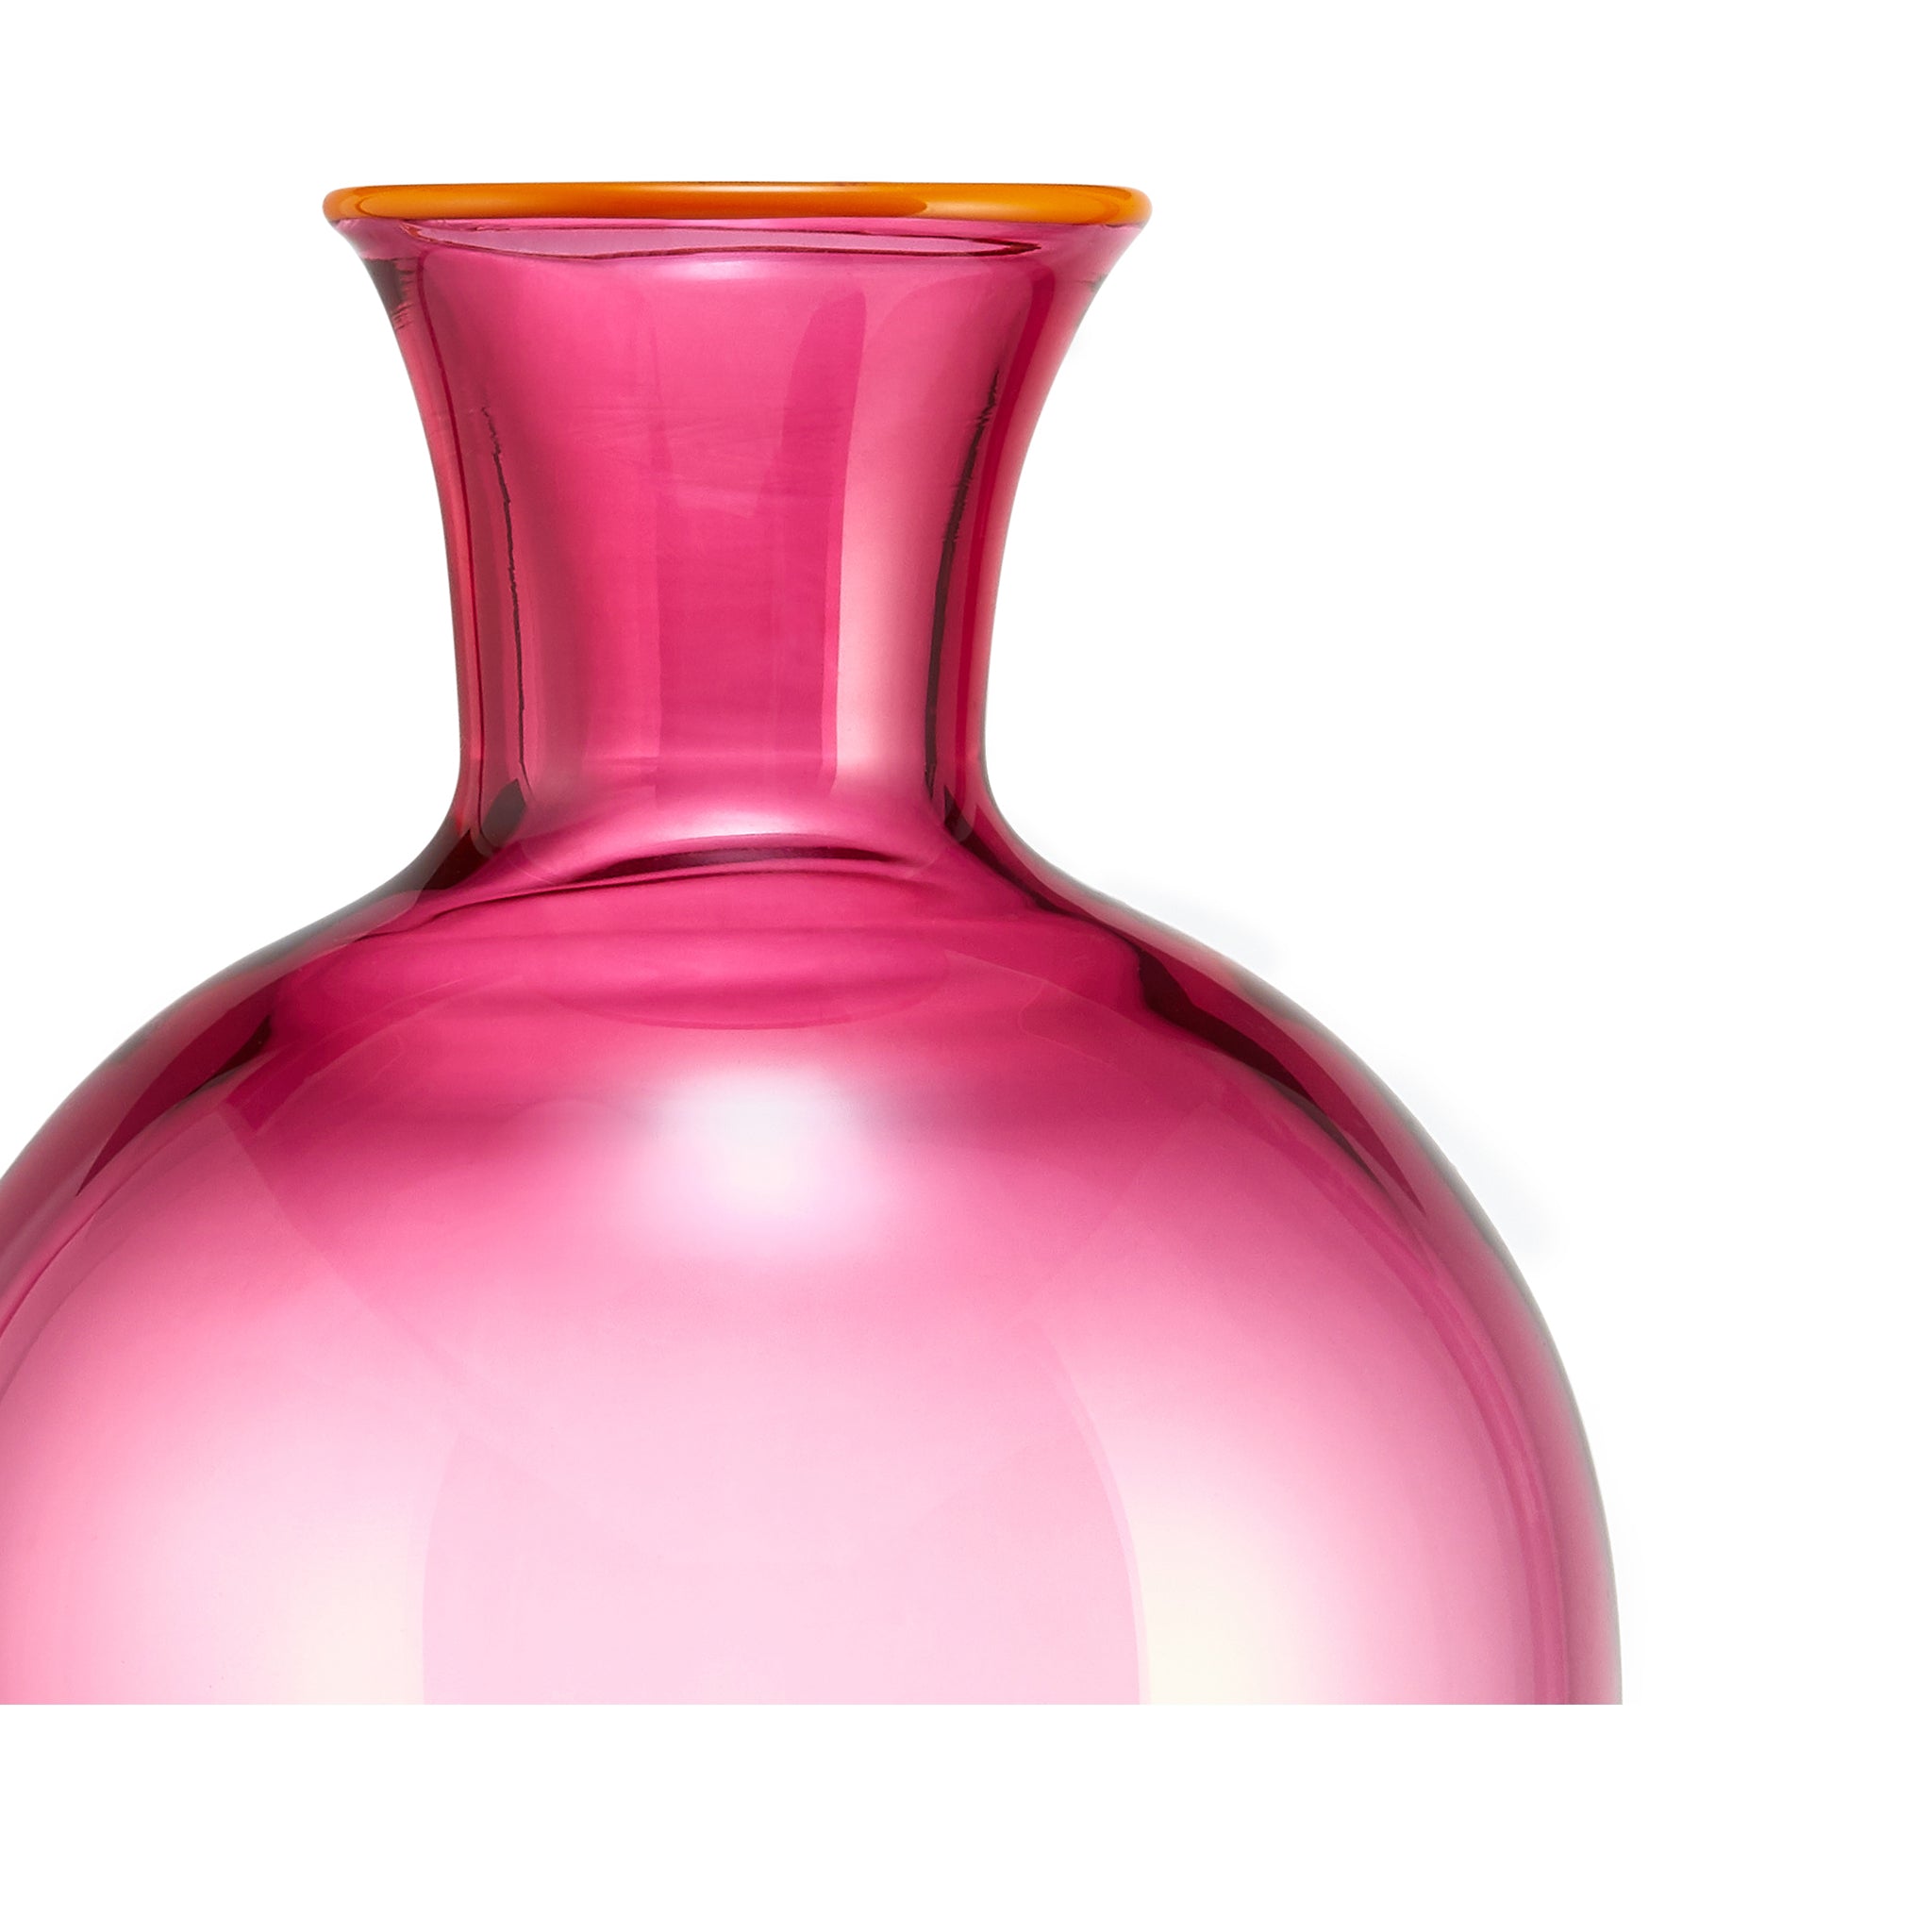 Handblown Glass Bumba Bedside Carafe and Glass Set in Fuchsia Pink with Orange Rim, 0.5L